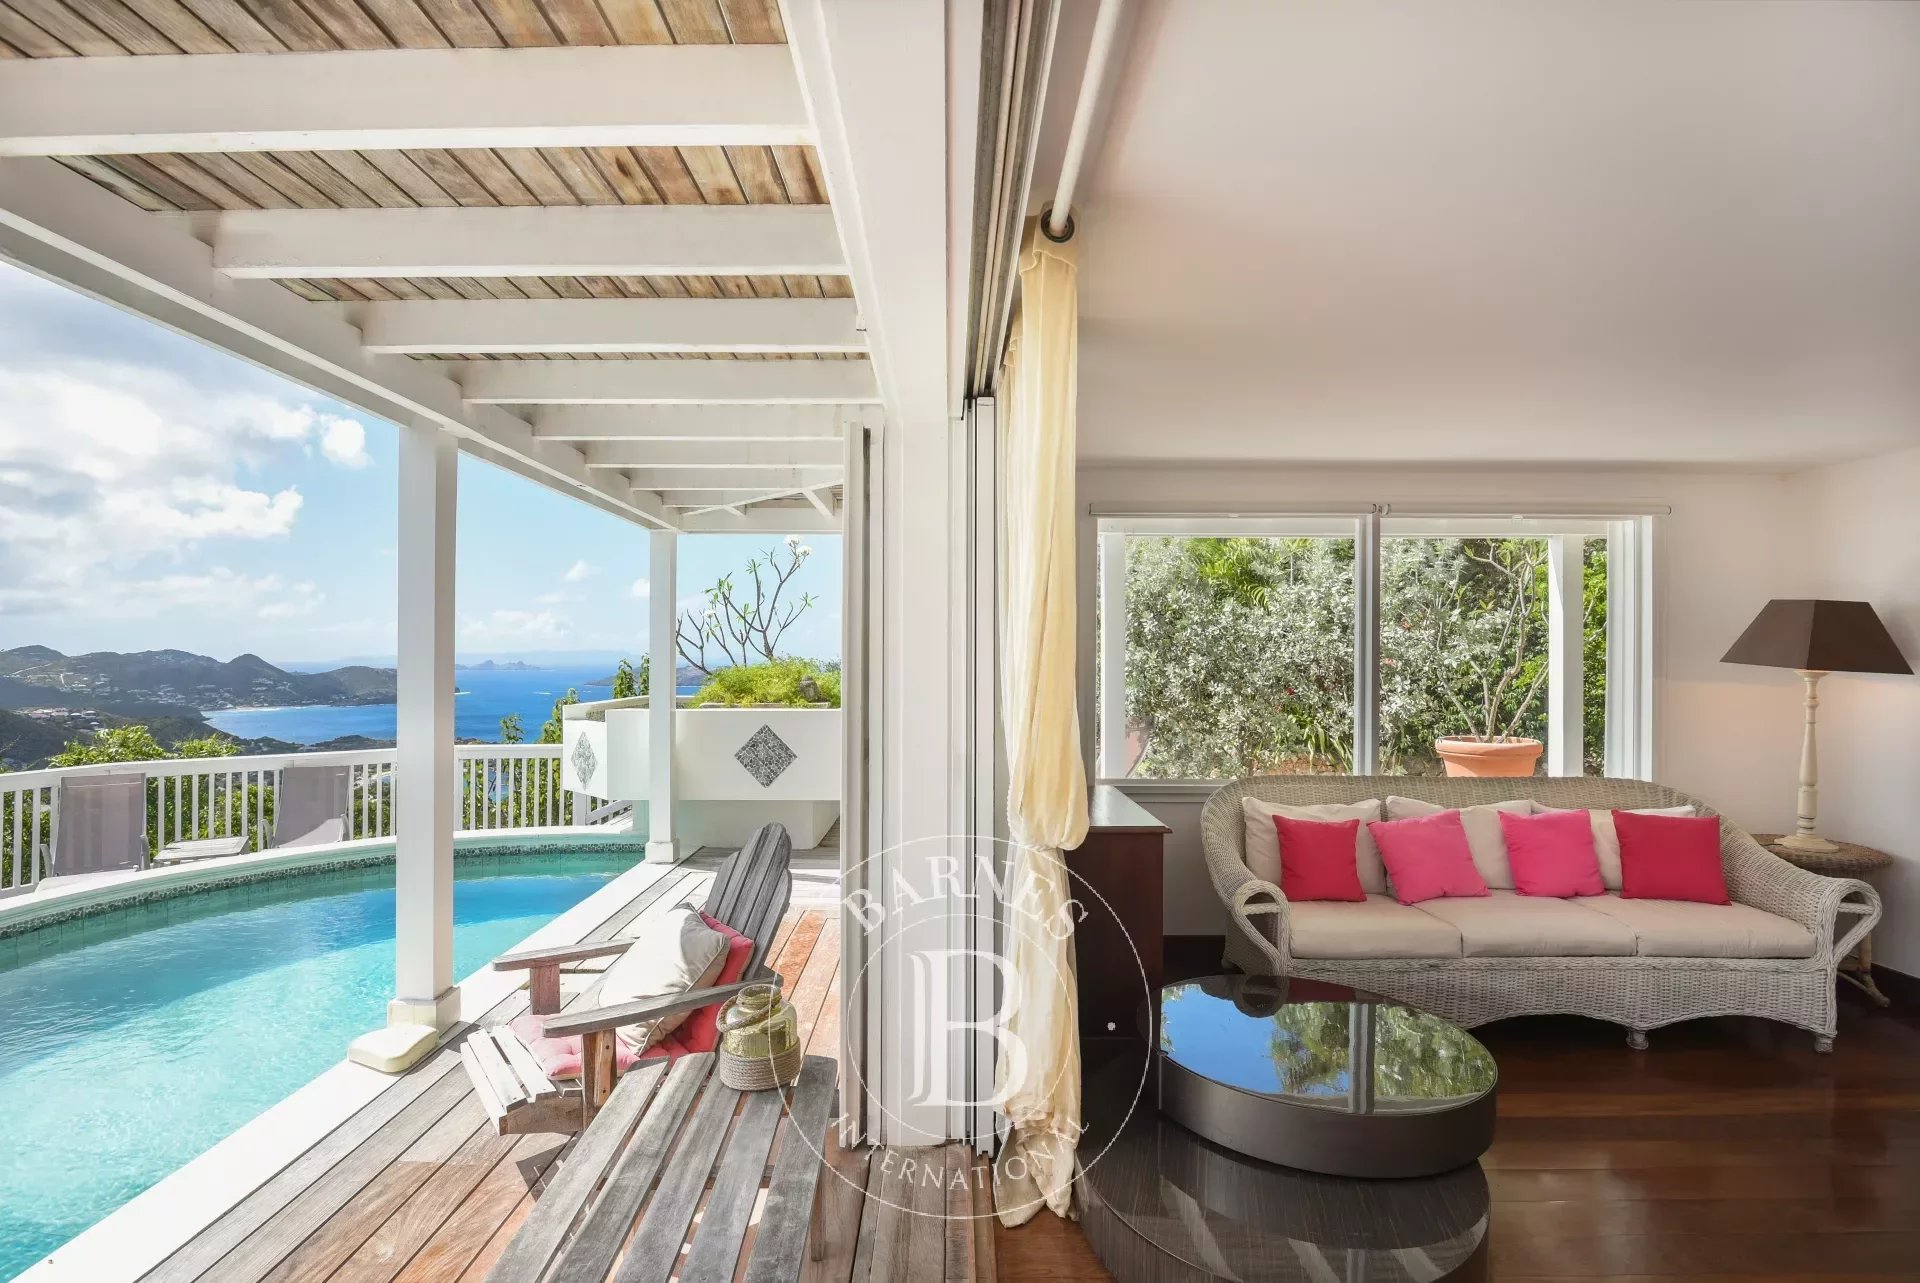 3 -Bedroom Villa in St.Barths - picture 10 title=